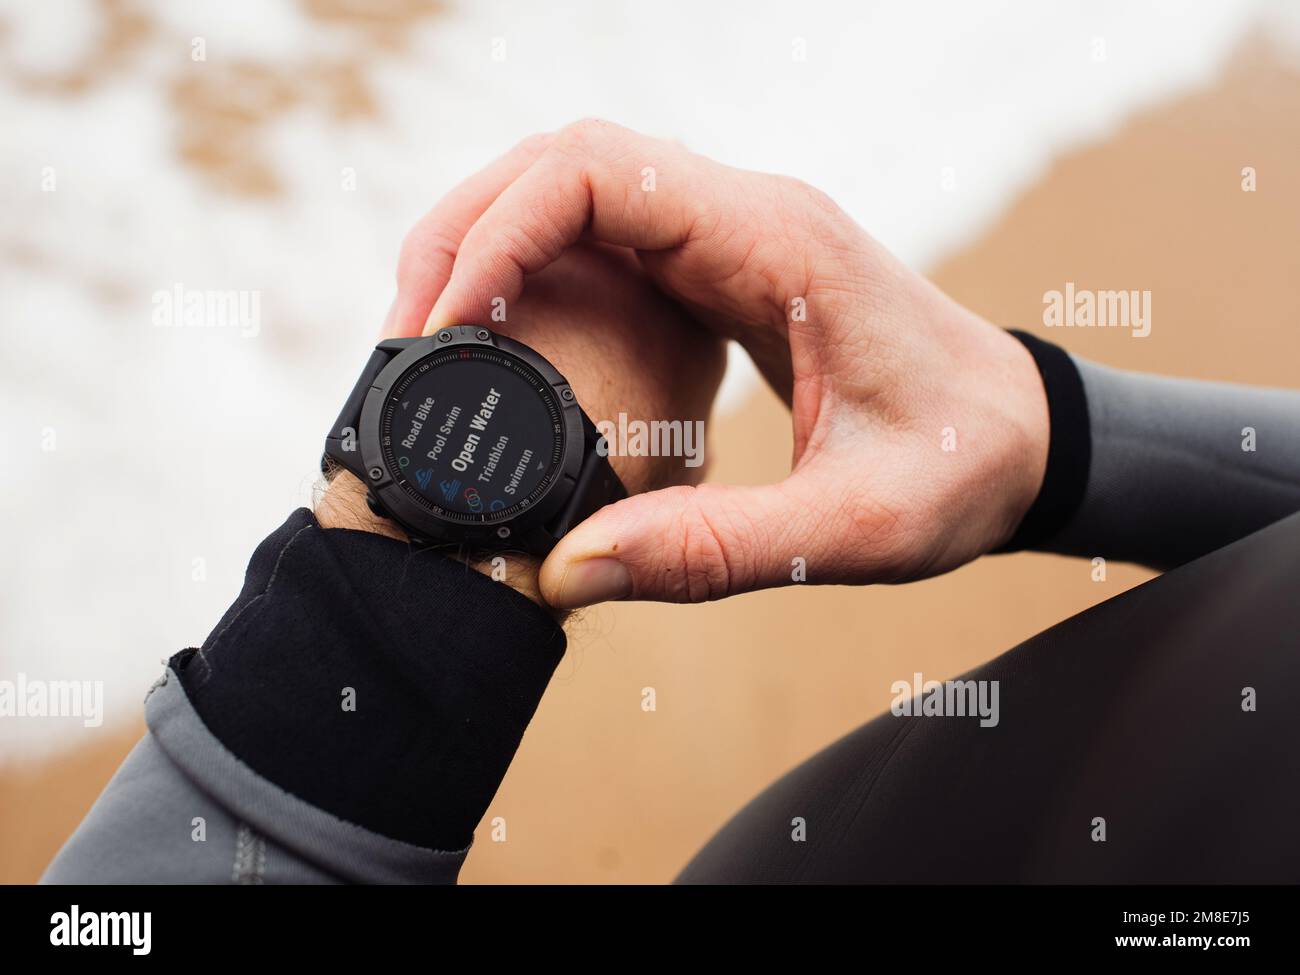 Man holding his sports watch ready for an open water swim Stock Photo